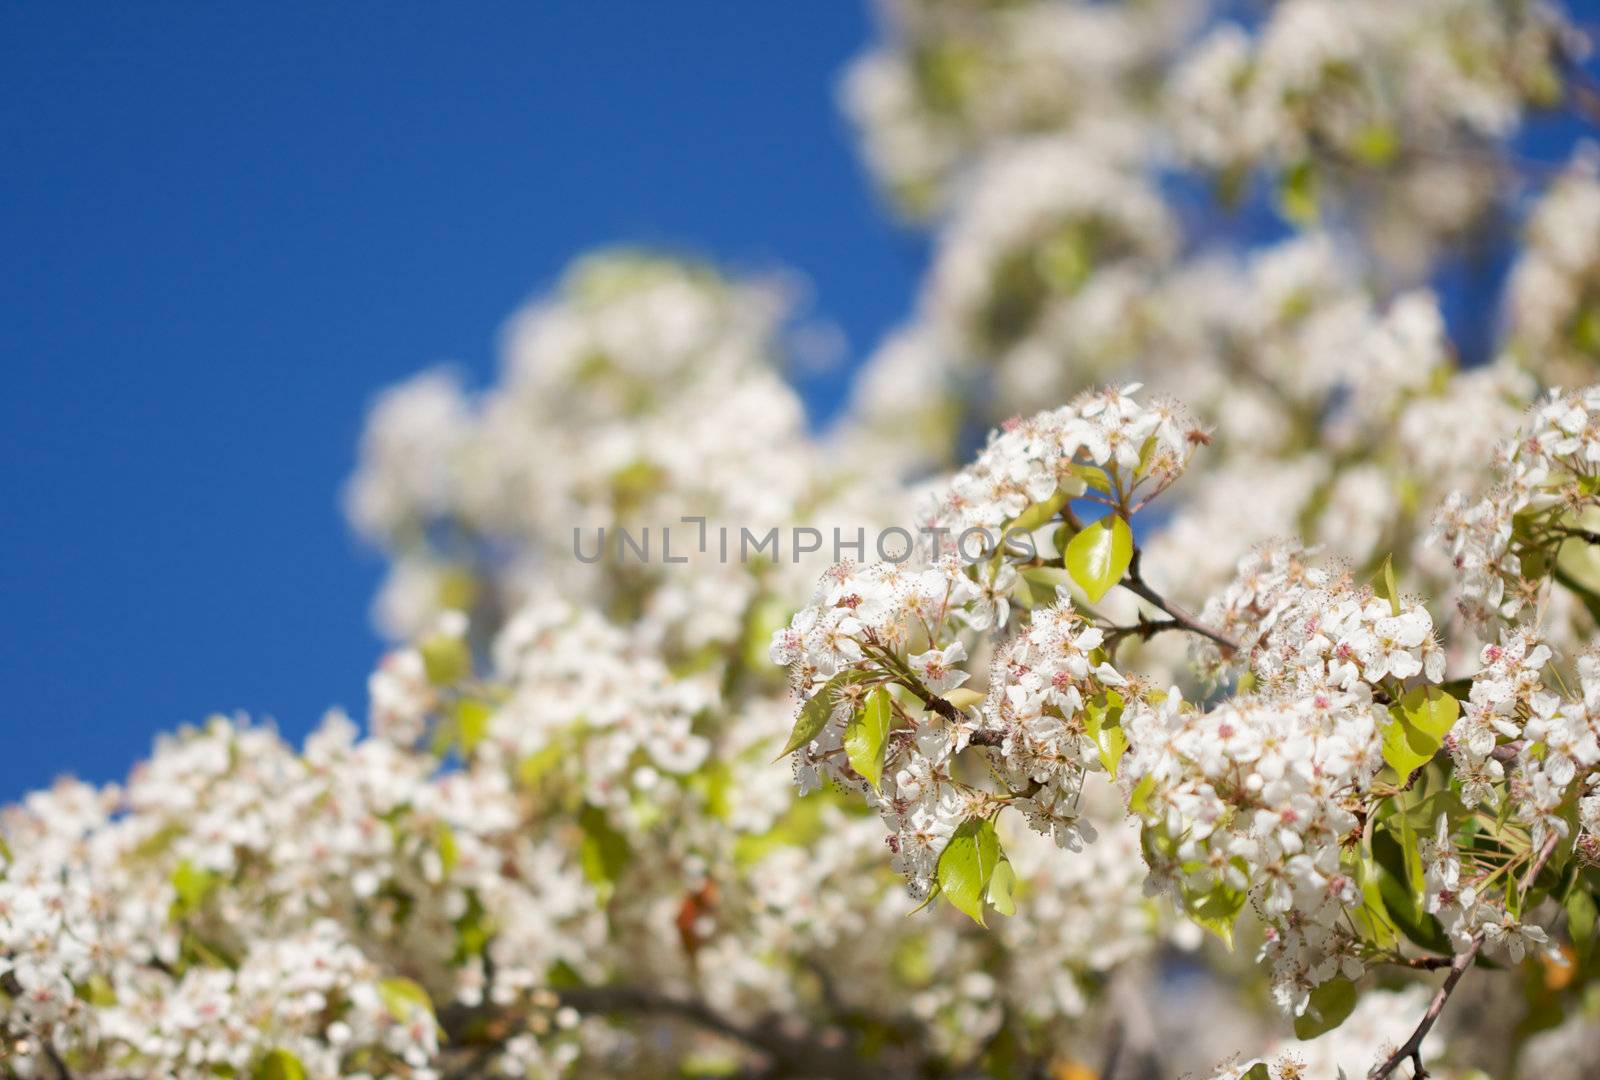 Flowering Tree Blossom in Early Springtime against a deep blue sky.